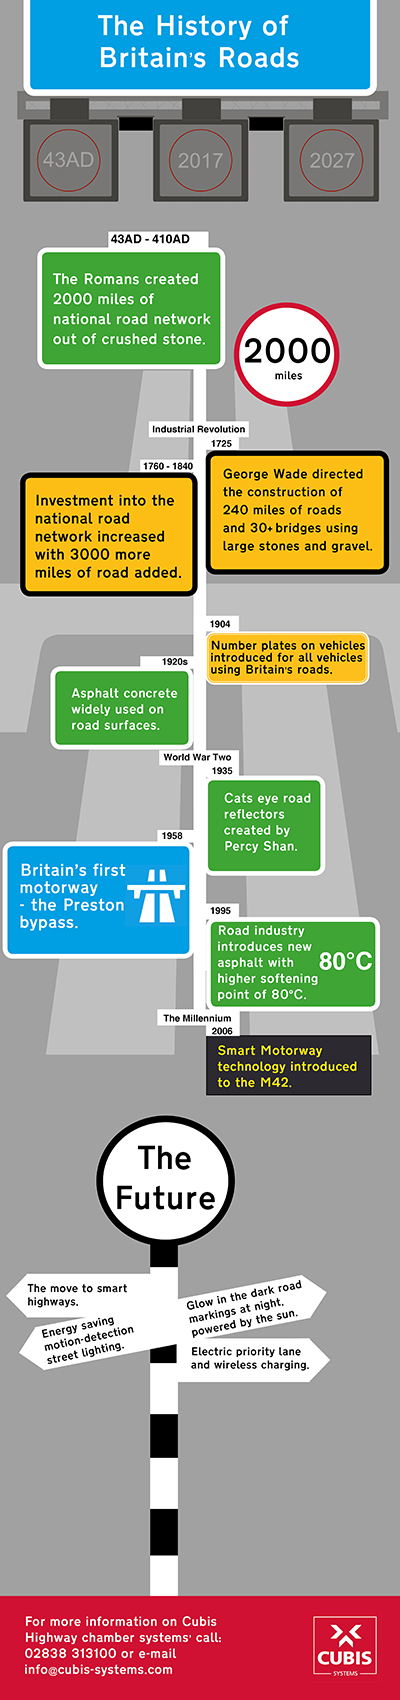 History of Britain's road infographic